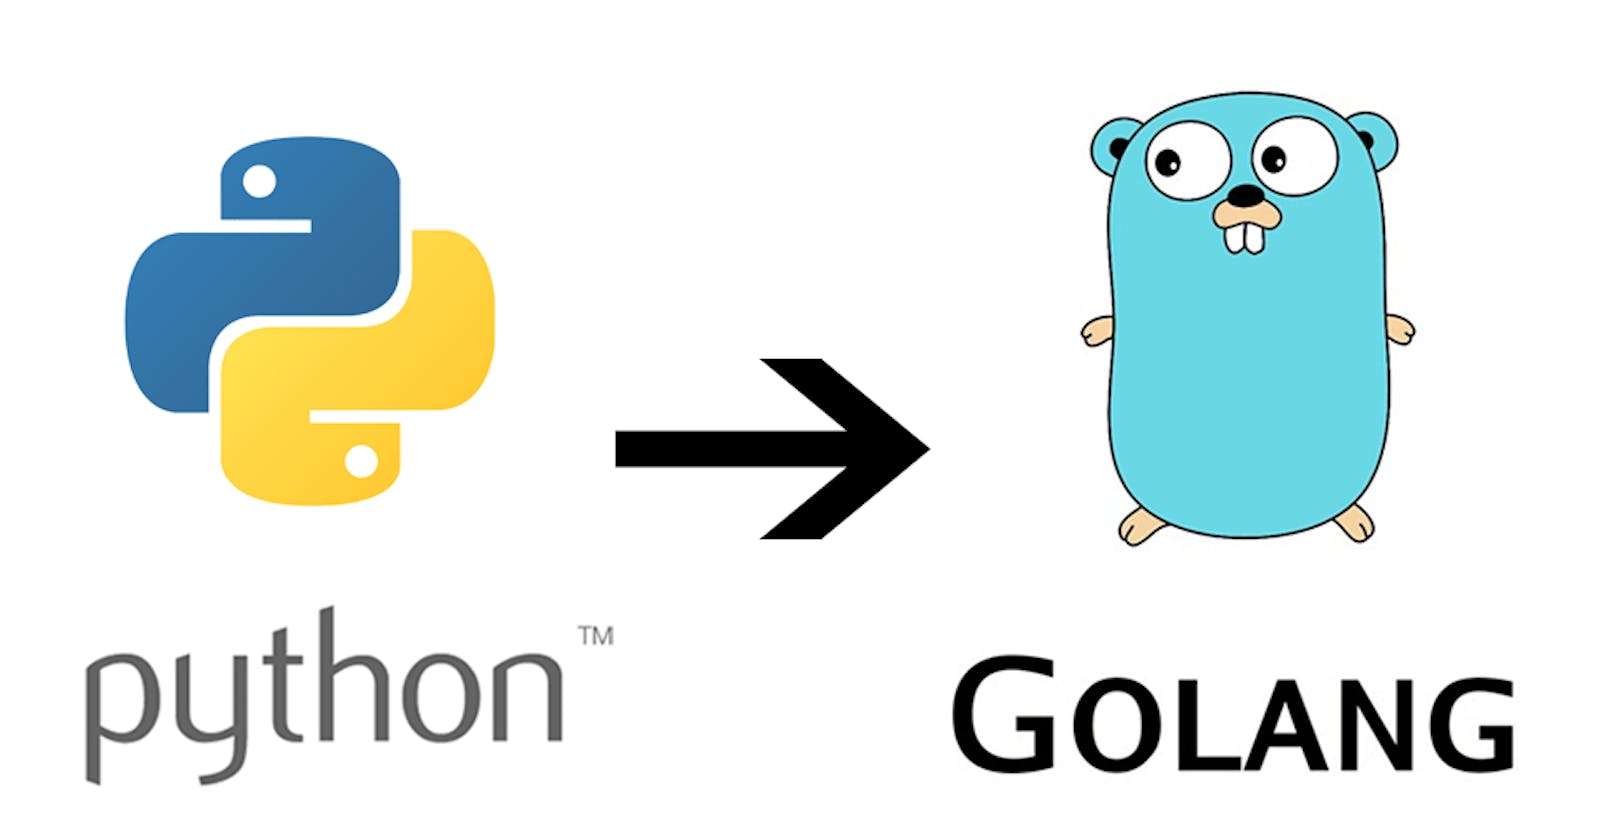 Why I started learning Golang